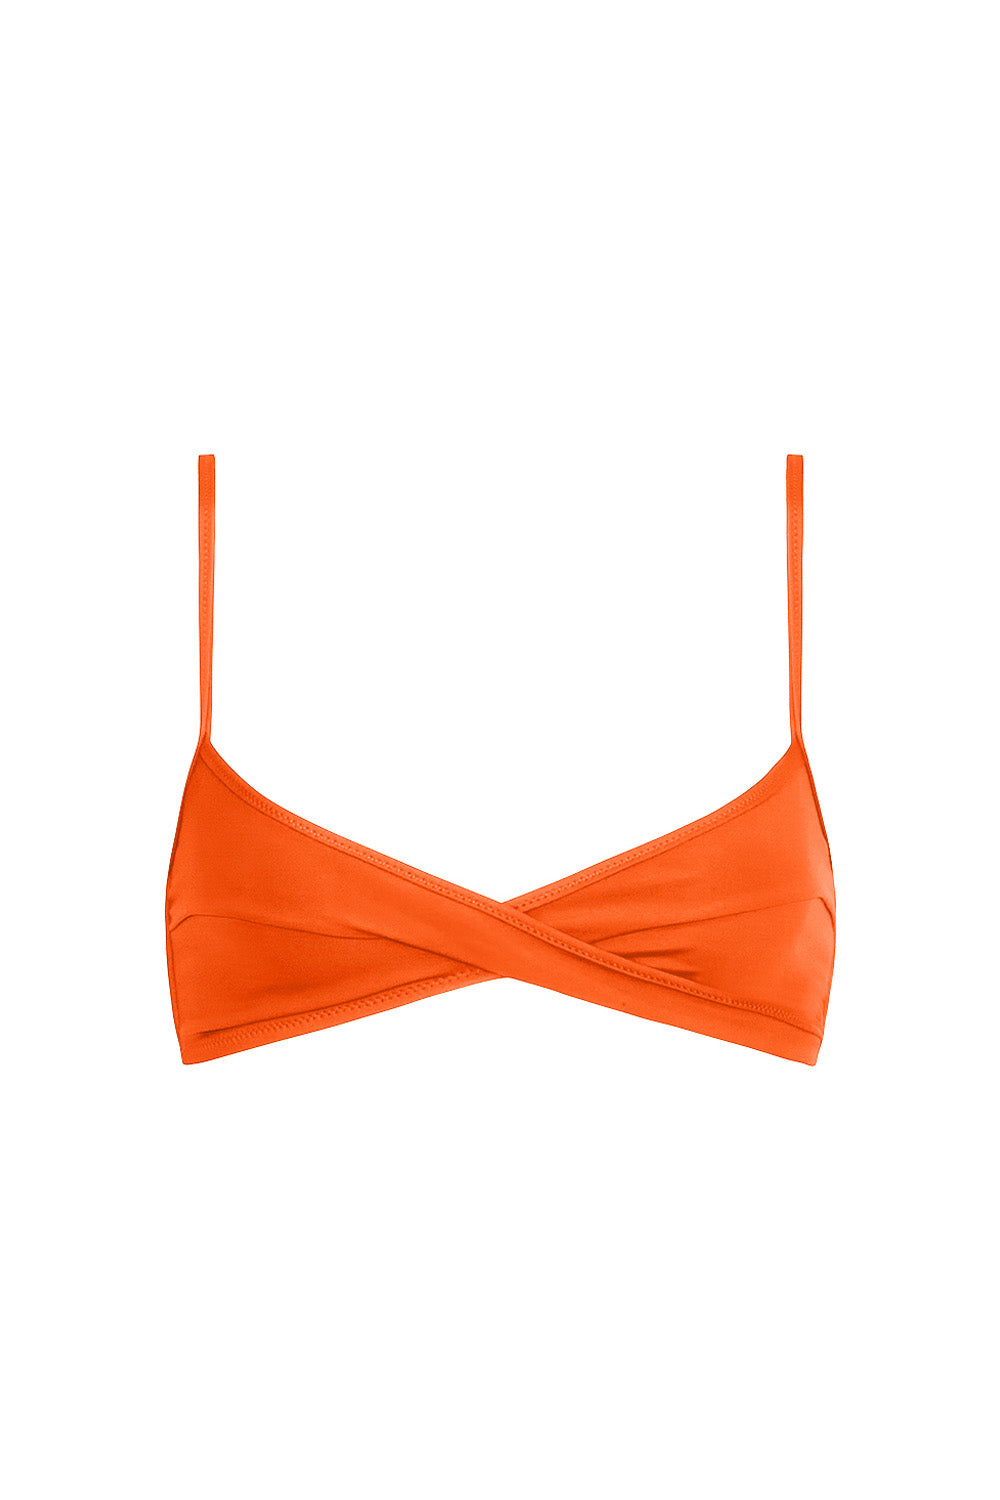 sculpting infinity top in persimmon compression – tropic of c